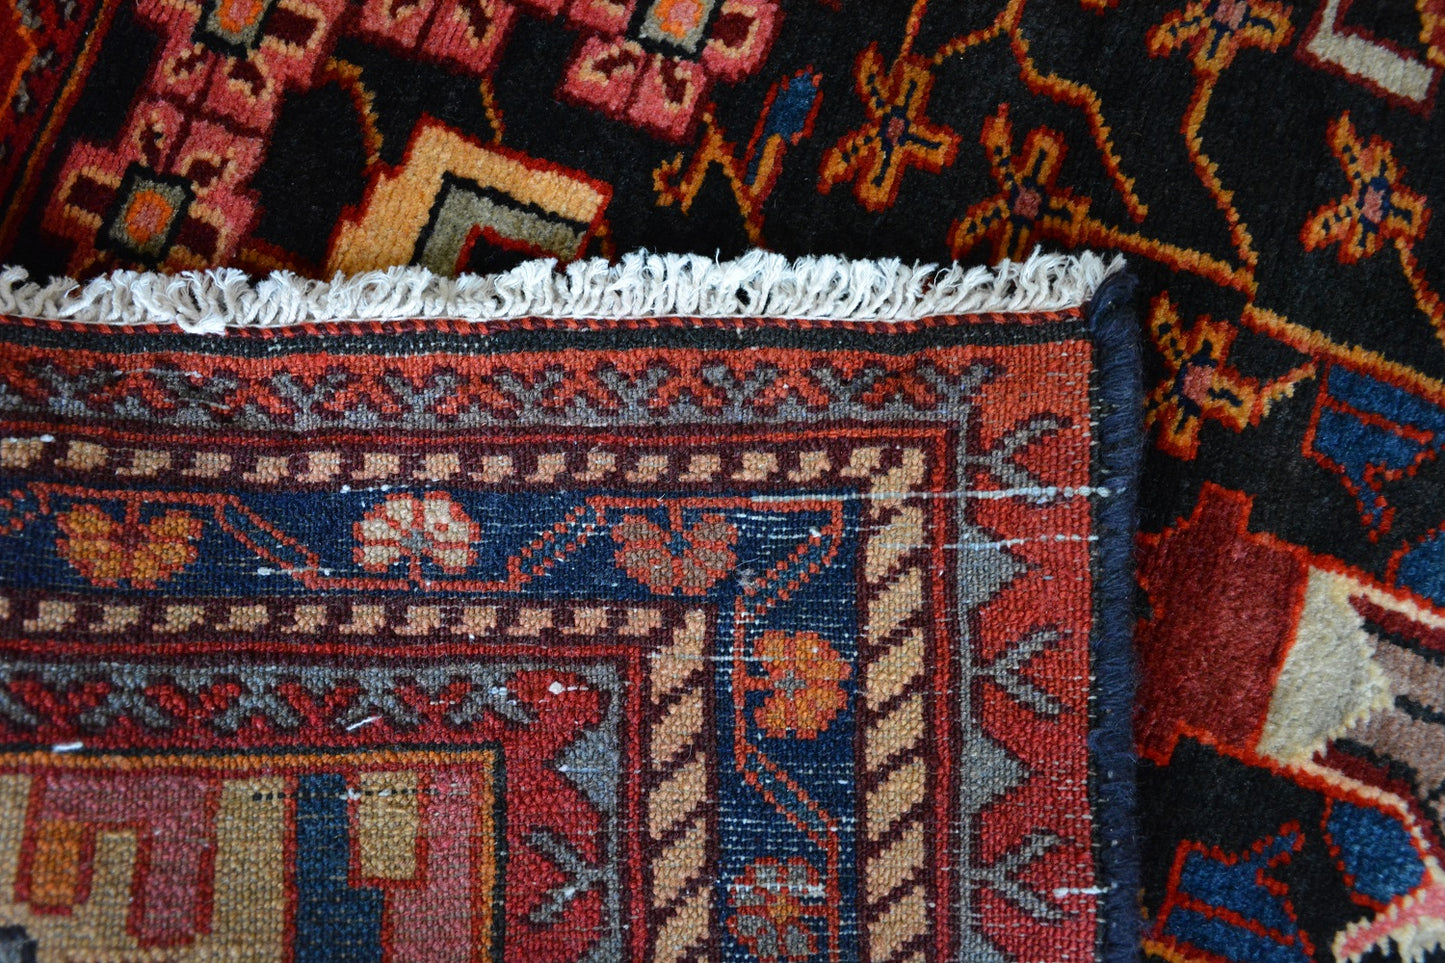 A brand new Persian village carpet from the Hamadan district